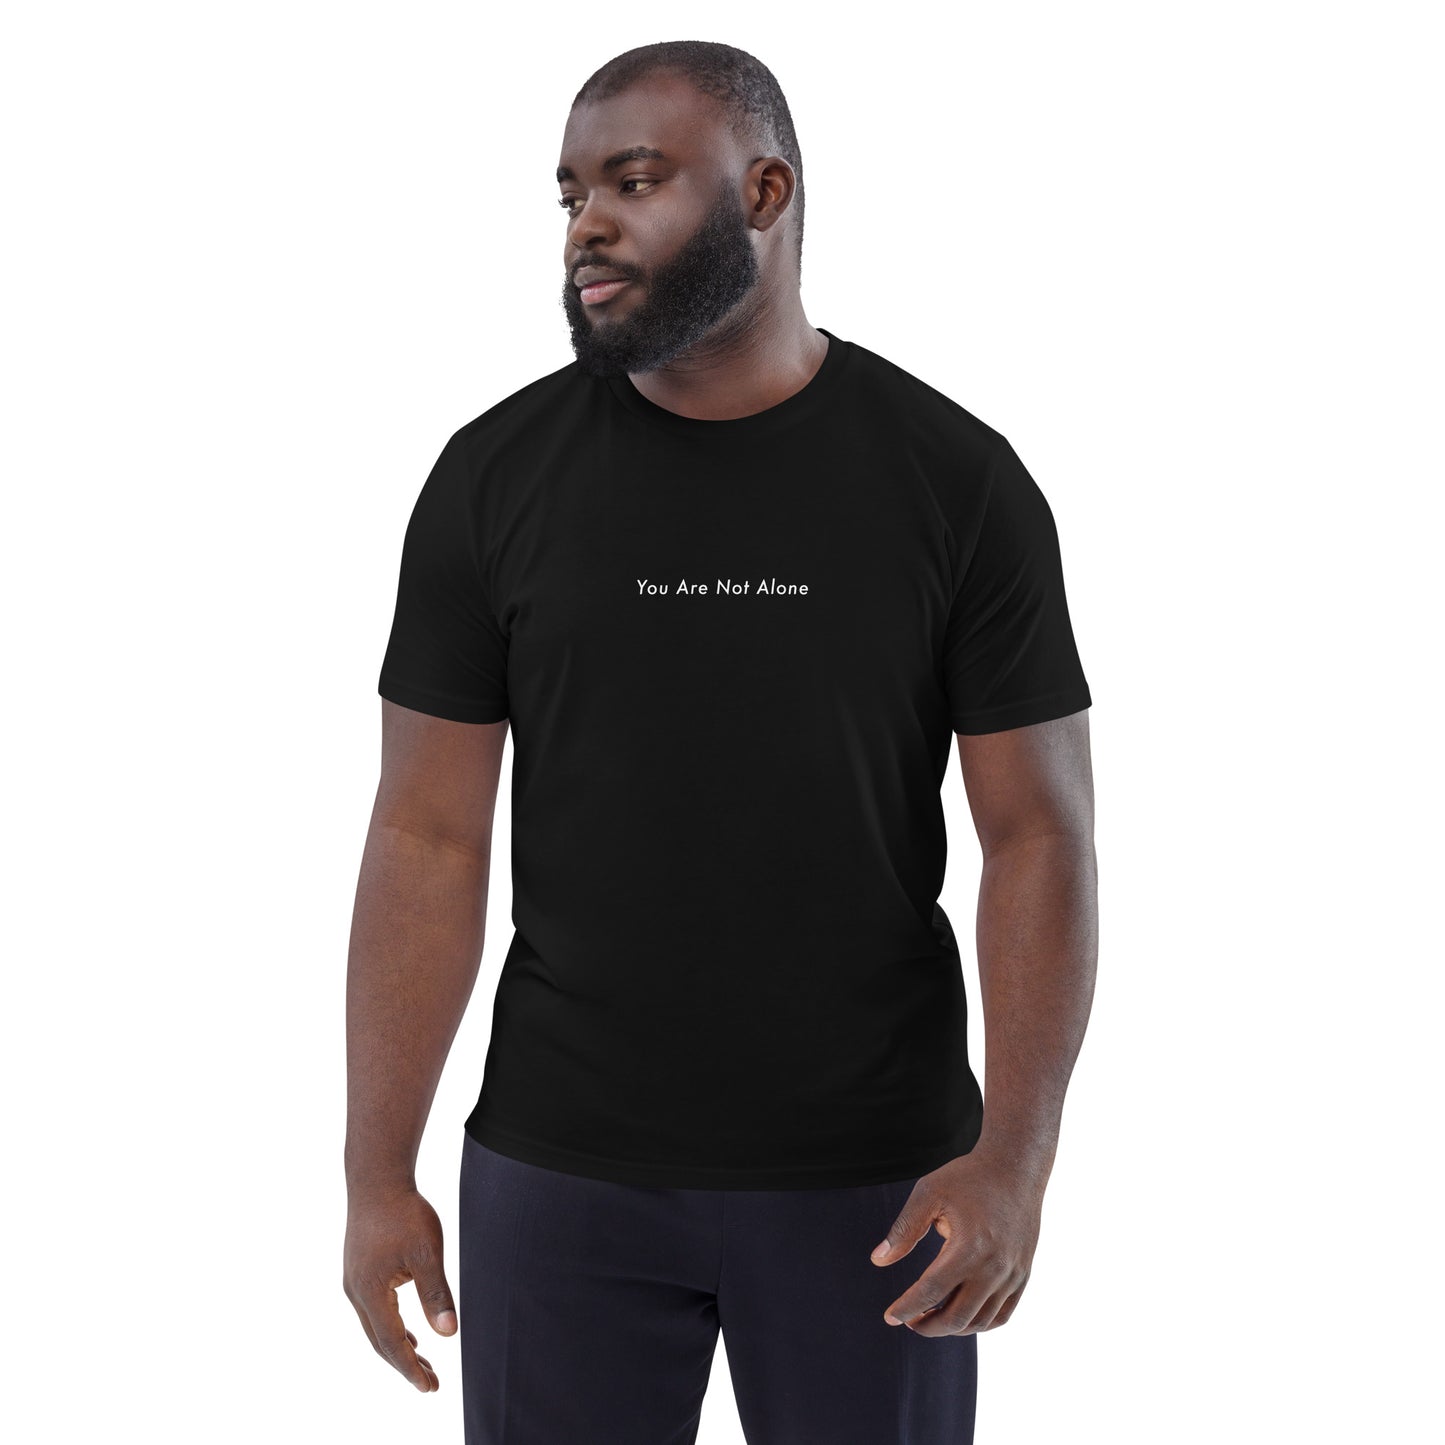 You Are Not Alone Men's 100% Organic Cotton T-Shirt